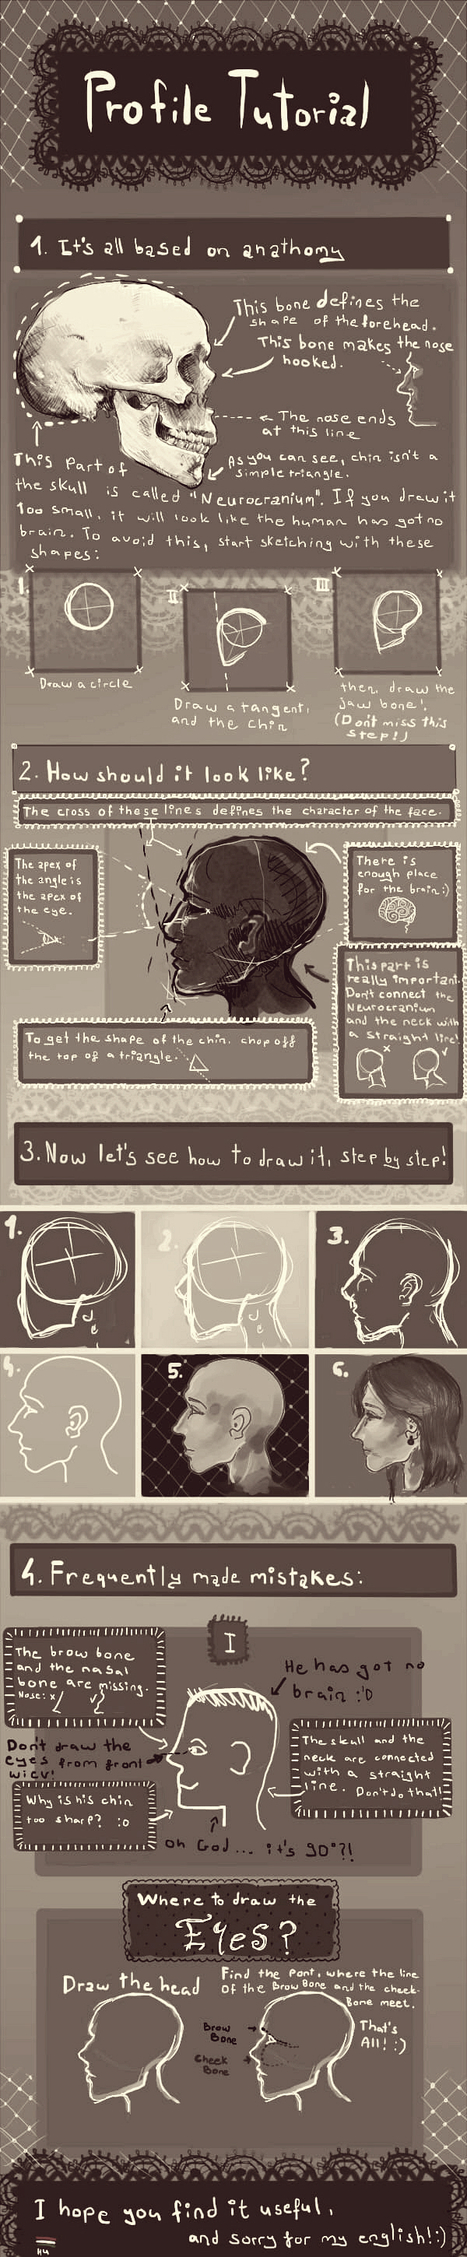 Profile Drawing Reference Guide | Drawing References and Resources | Scoop.it